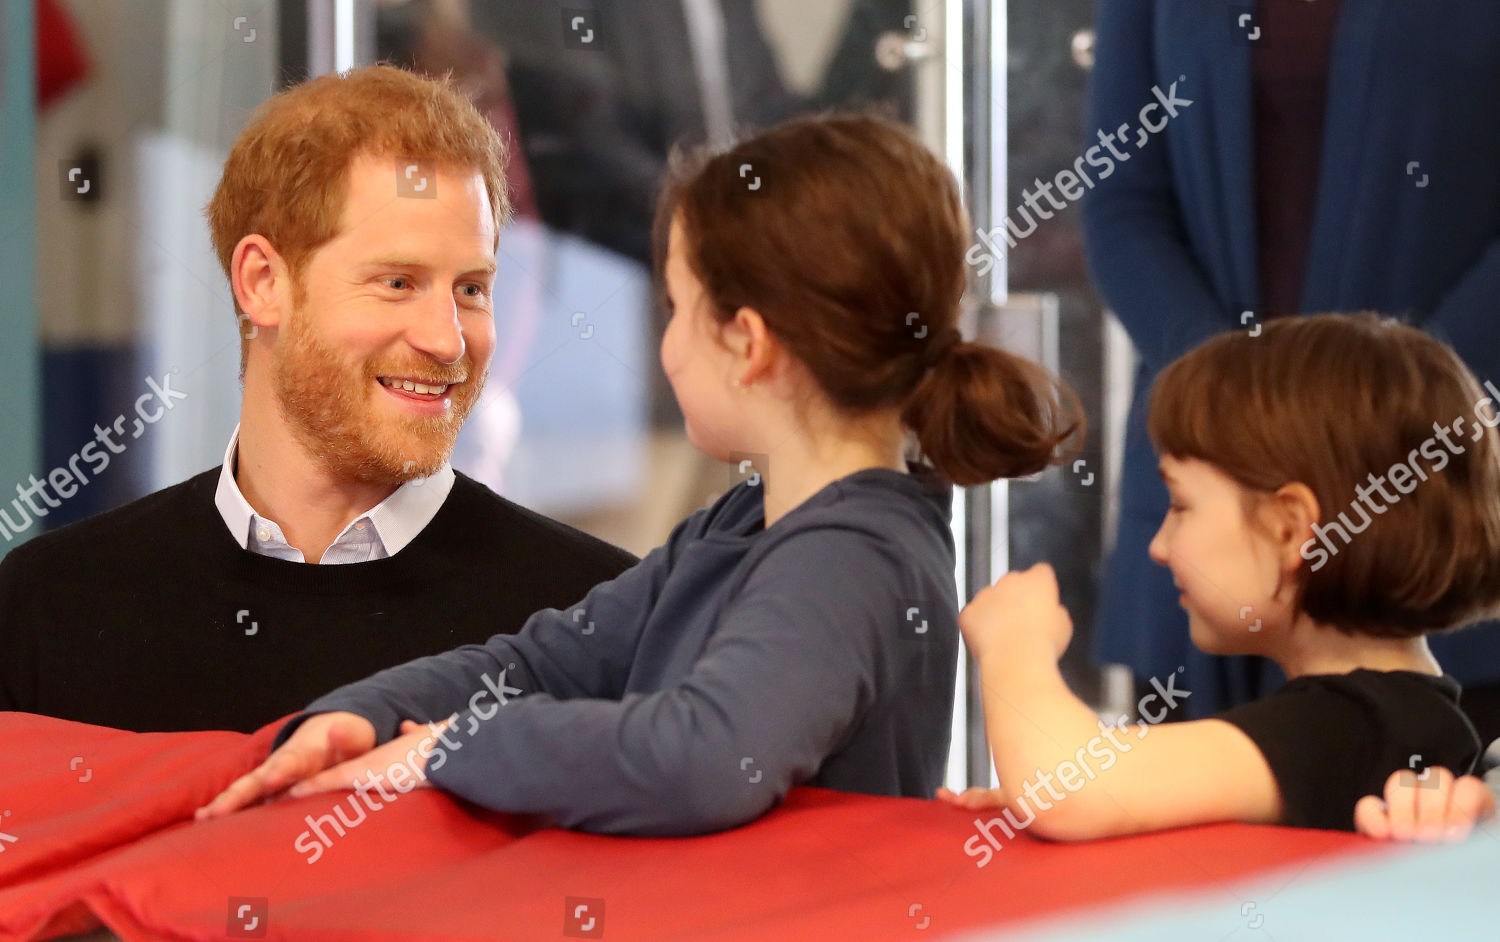 prince-harry-visit-to-fit-and-fed-half-term-initiative-streatham-london-uk-shutterstock-editorial-10110713f.jpg